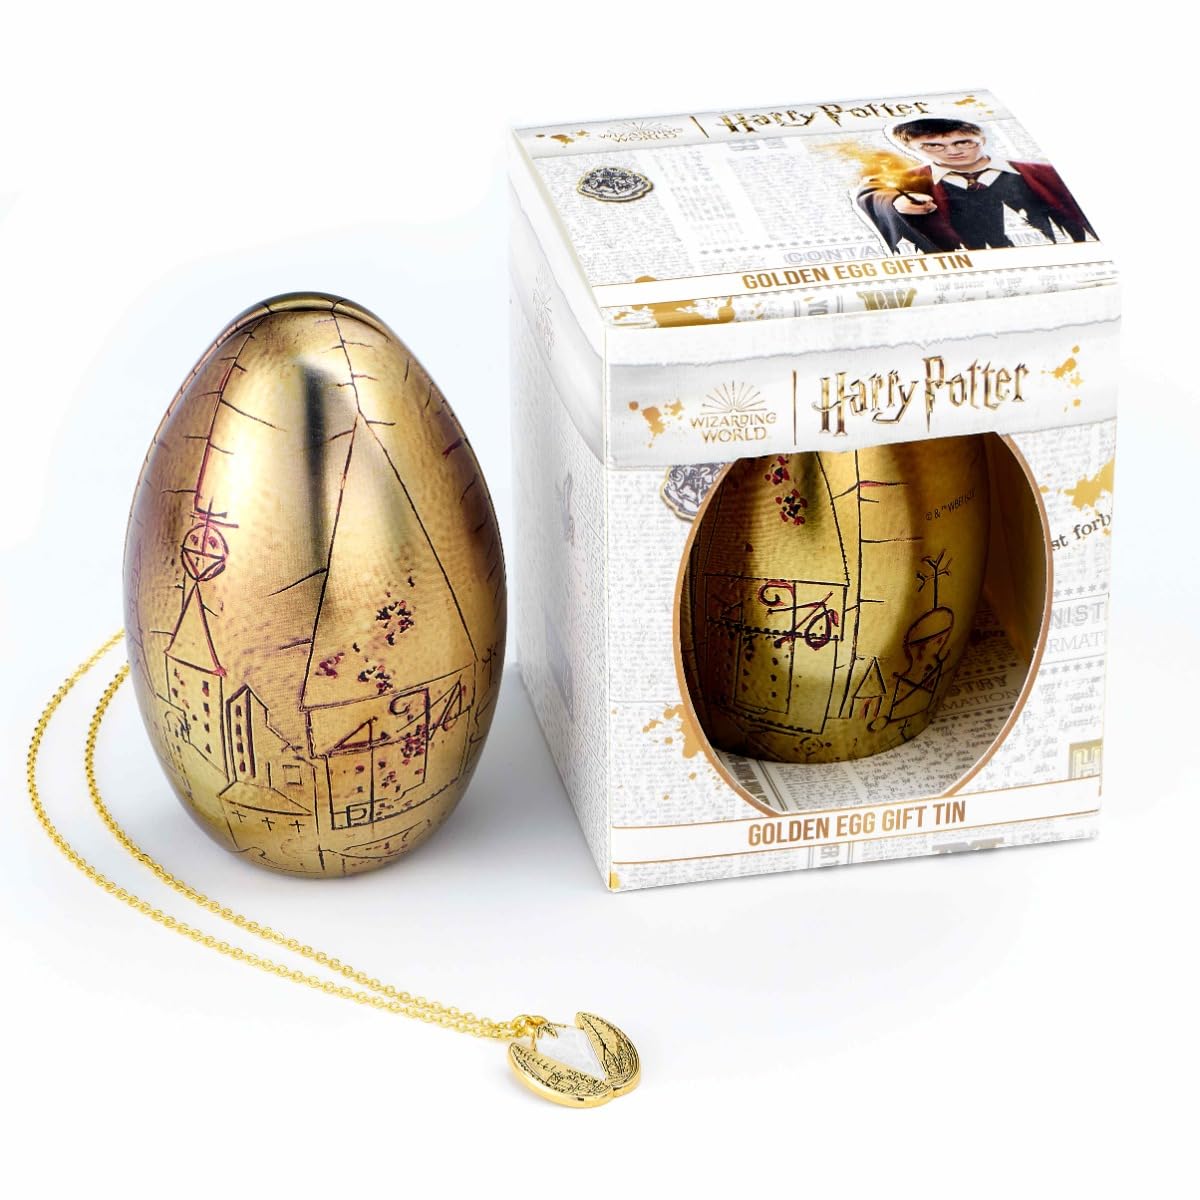 HARRY POTTER Boxed Golden Egg Gift Tin with Necklace - Gold, One Size, Zinc